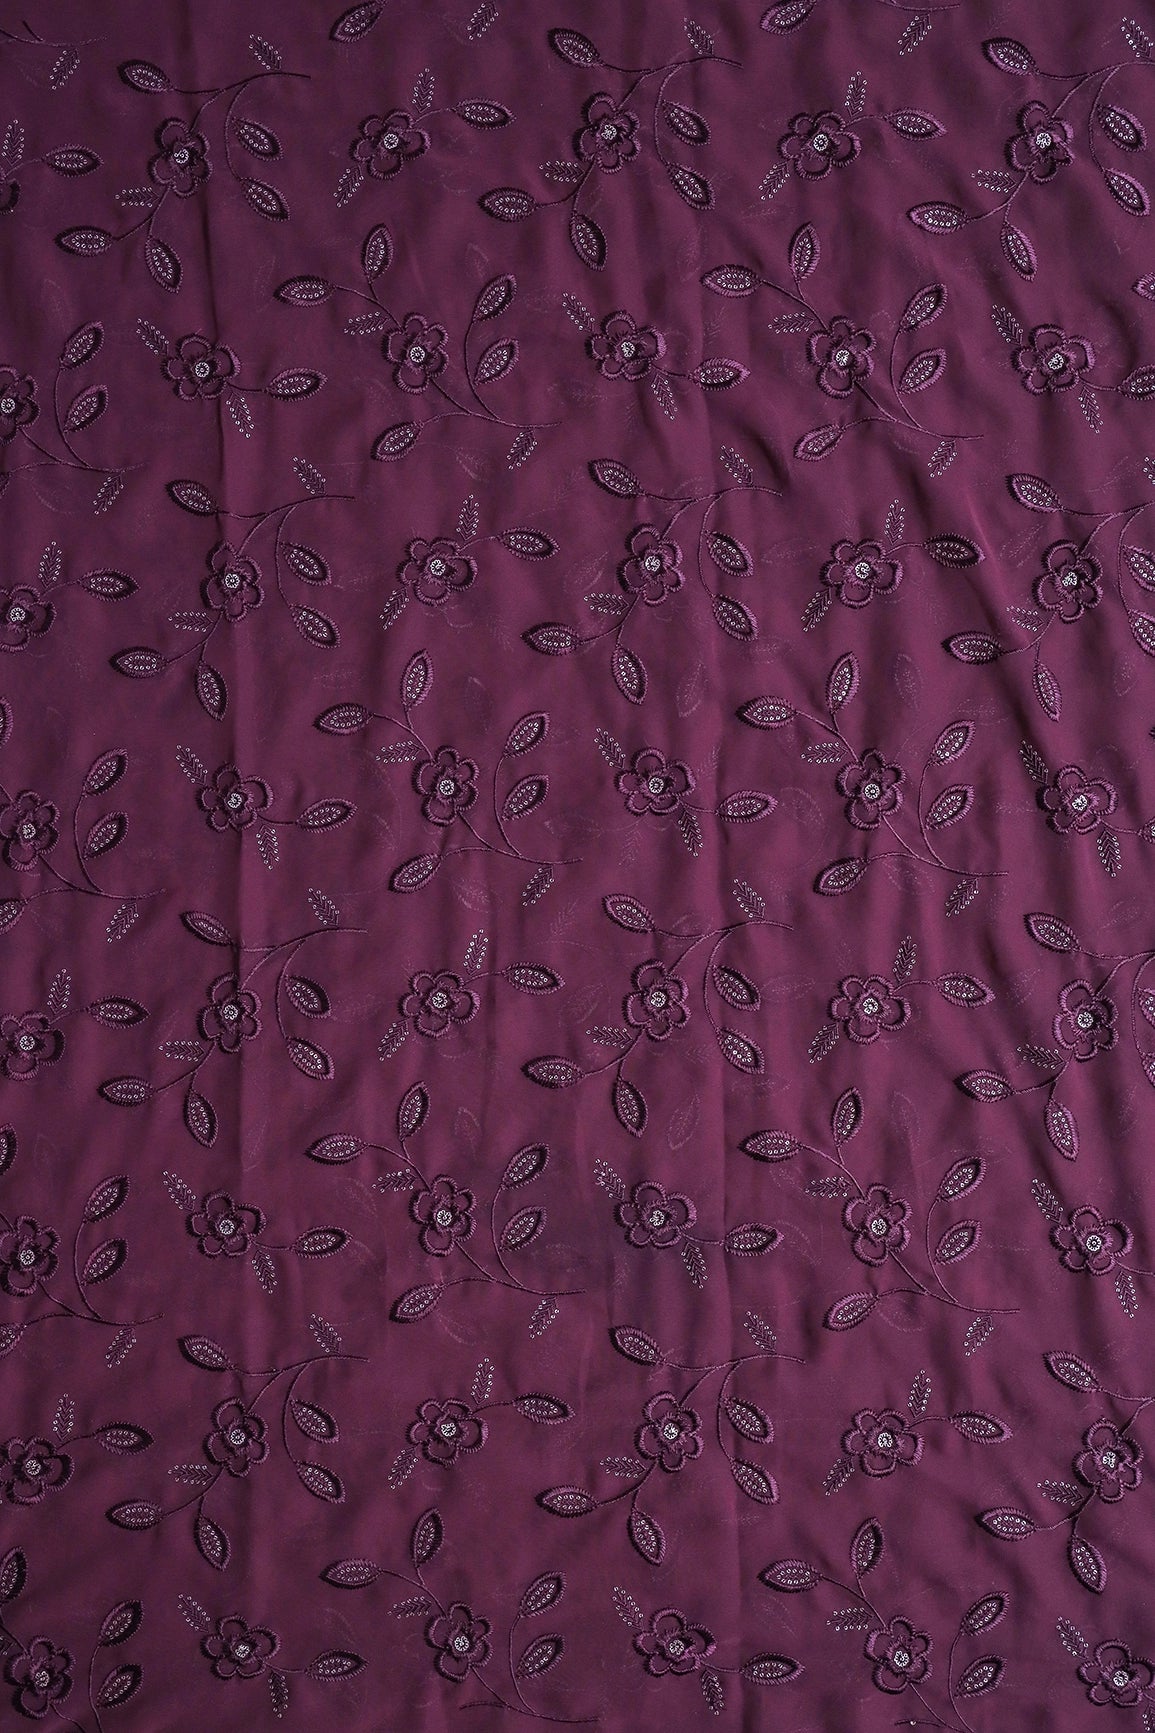 2 Meter Cut Piece Of Wine Thread With Gold Sequins Floral Embroidery On Wine Georgette Fabric - doeraa